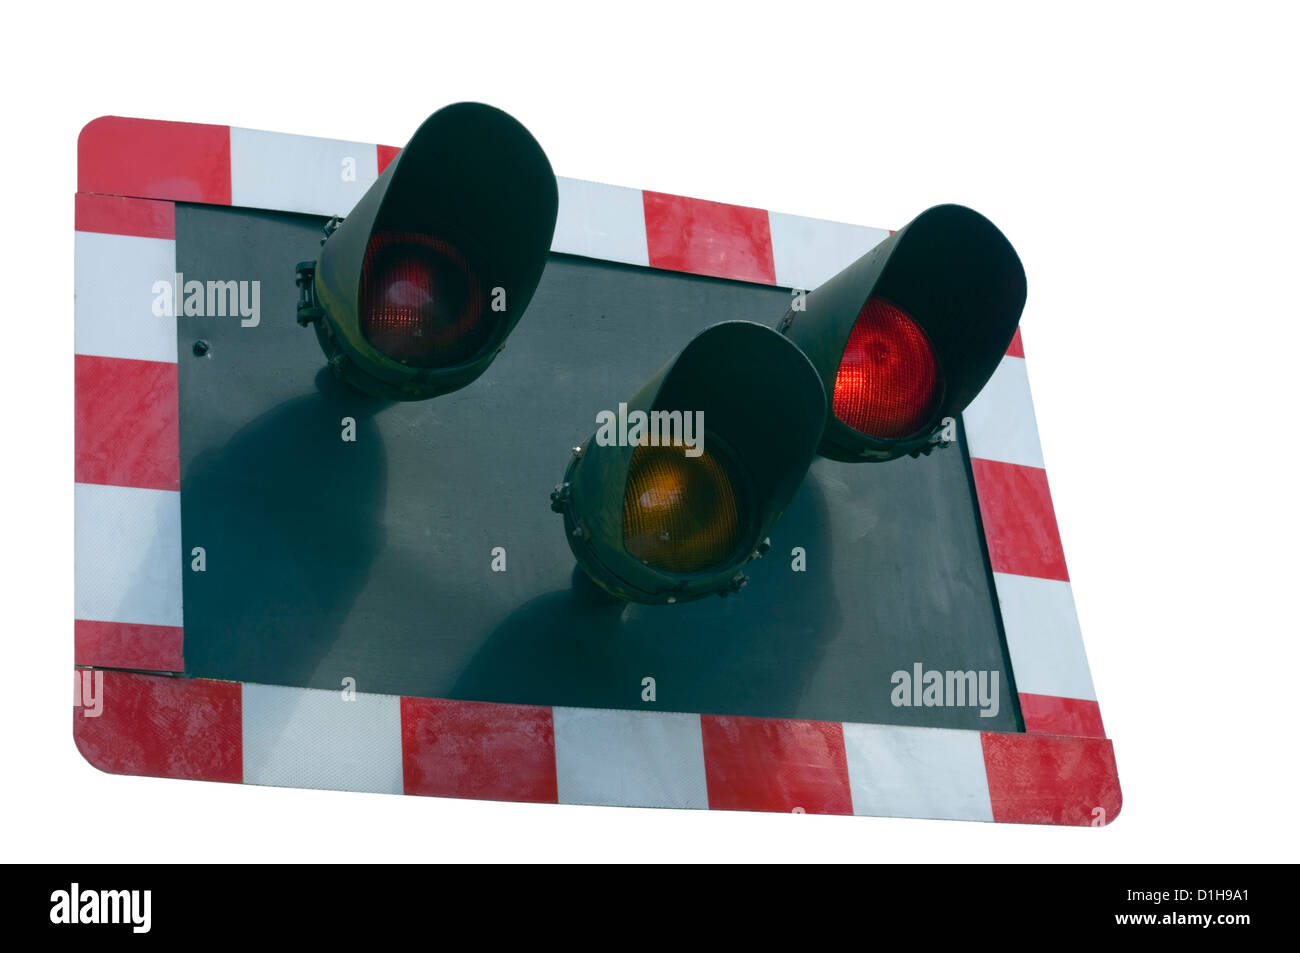 Red Warning Lights Flashing at a Railway Level Crossing Stock Photo